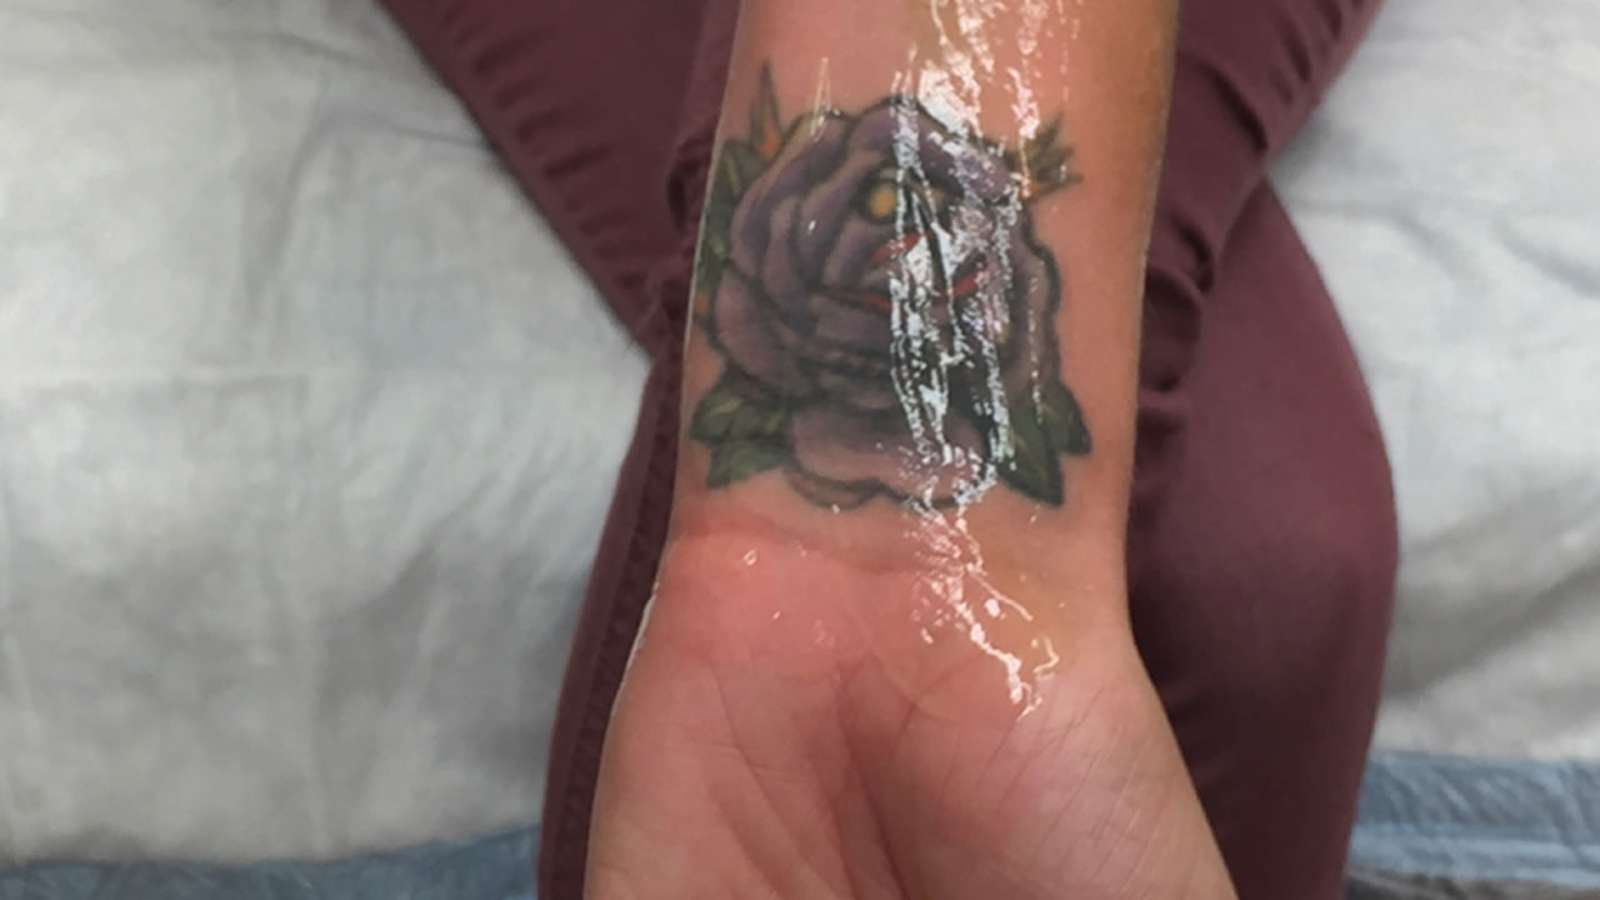 Gang tattoo removal program expands to help human trafficking victims ...